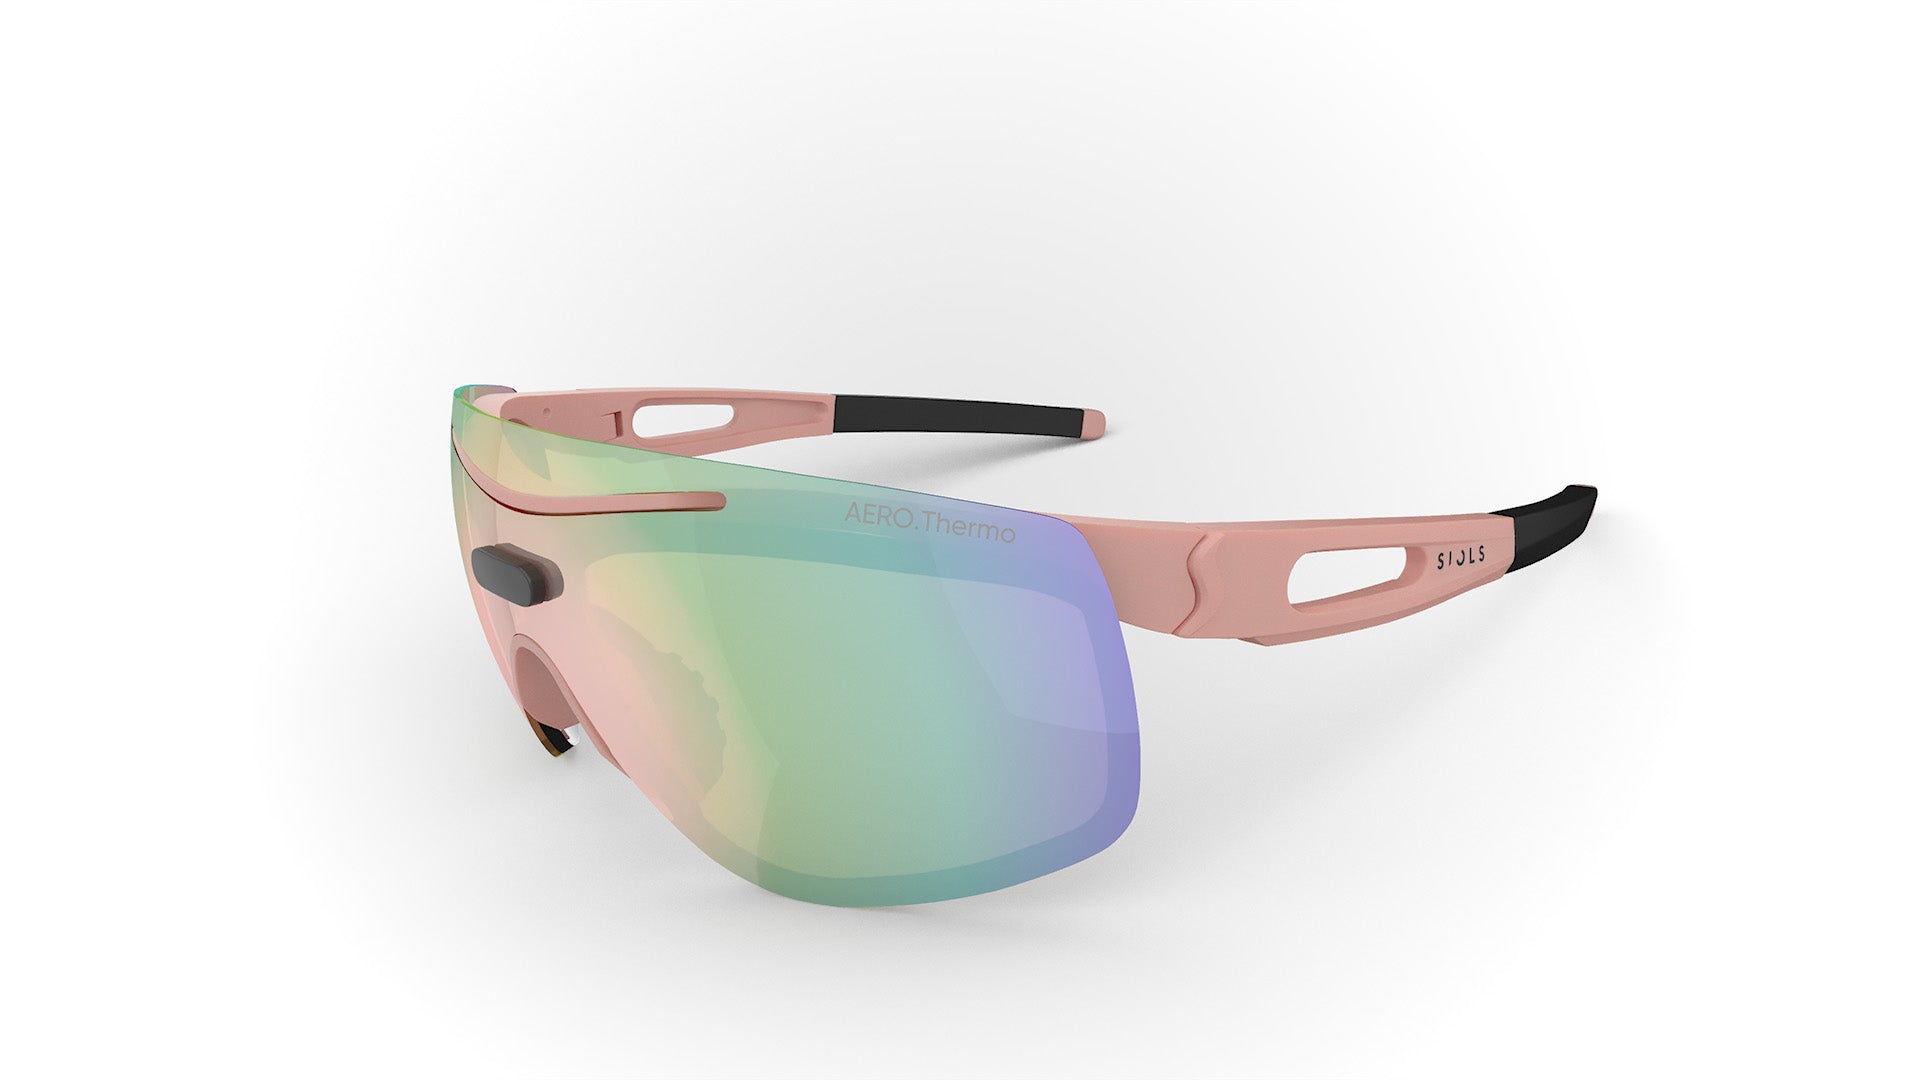 SIOLS.System AERO.Thermo PRO sports glasses winter sports